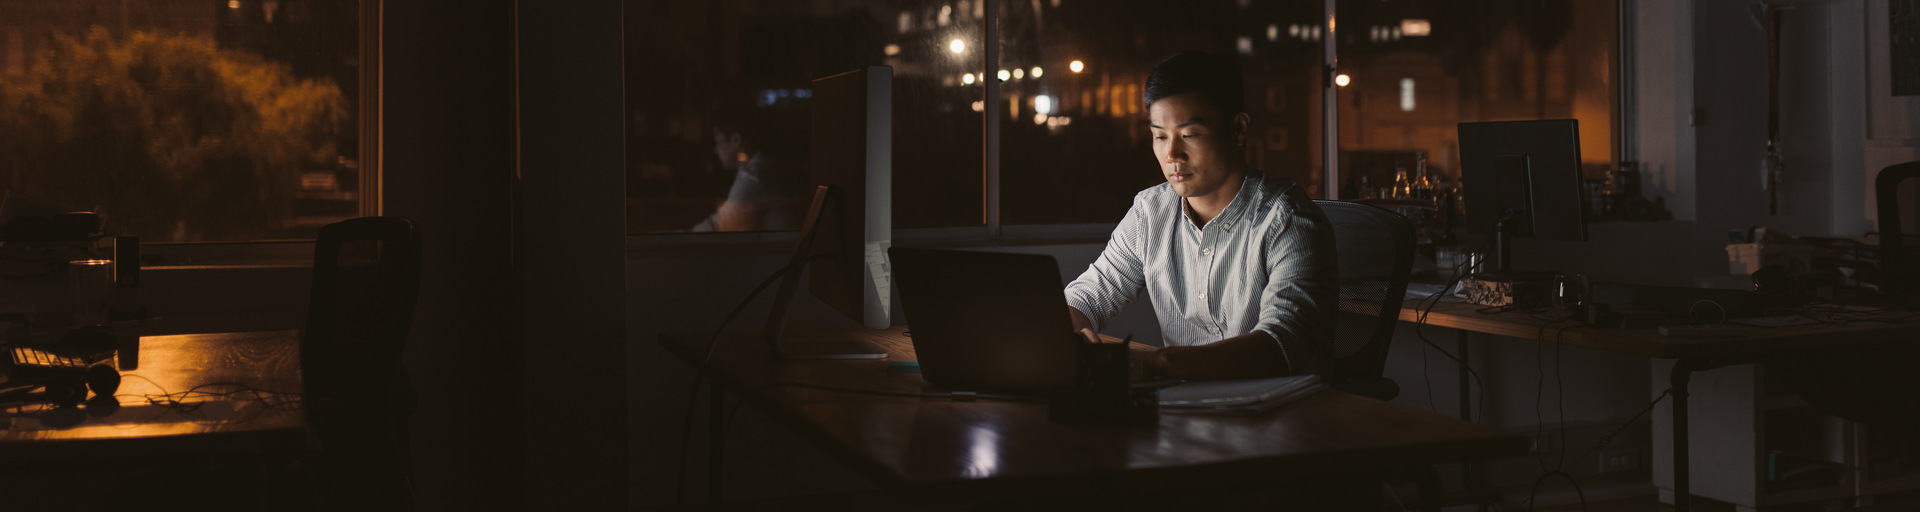 Young Asian businessman sitting at his desk working on a laptop in a dark office at night with city lights in the background